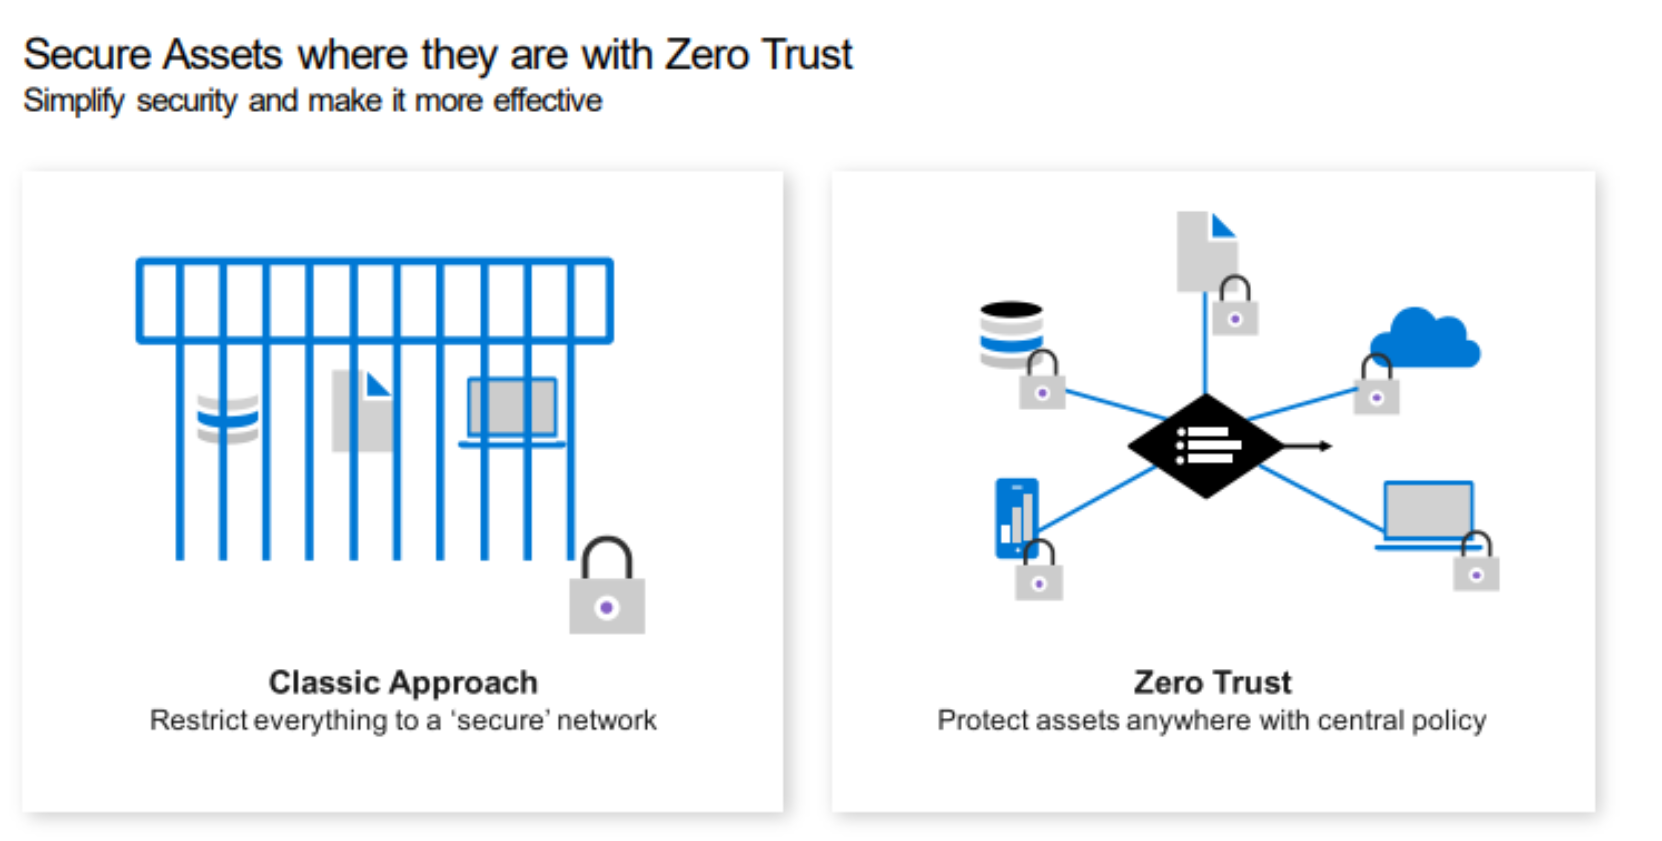 This image shows how Zero Trust provides protection to critical business assets through a central policy approach